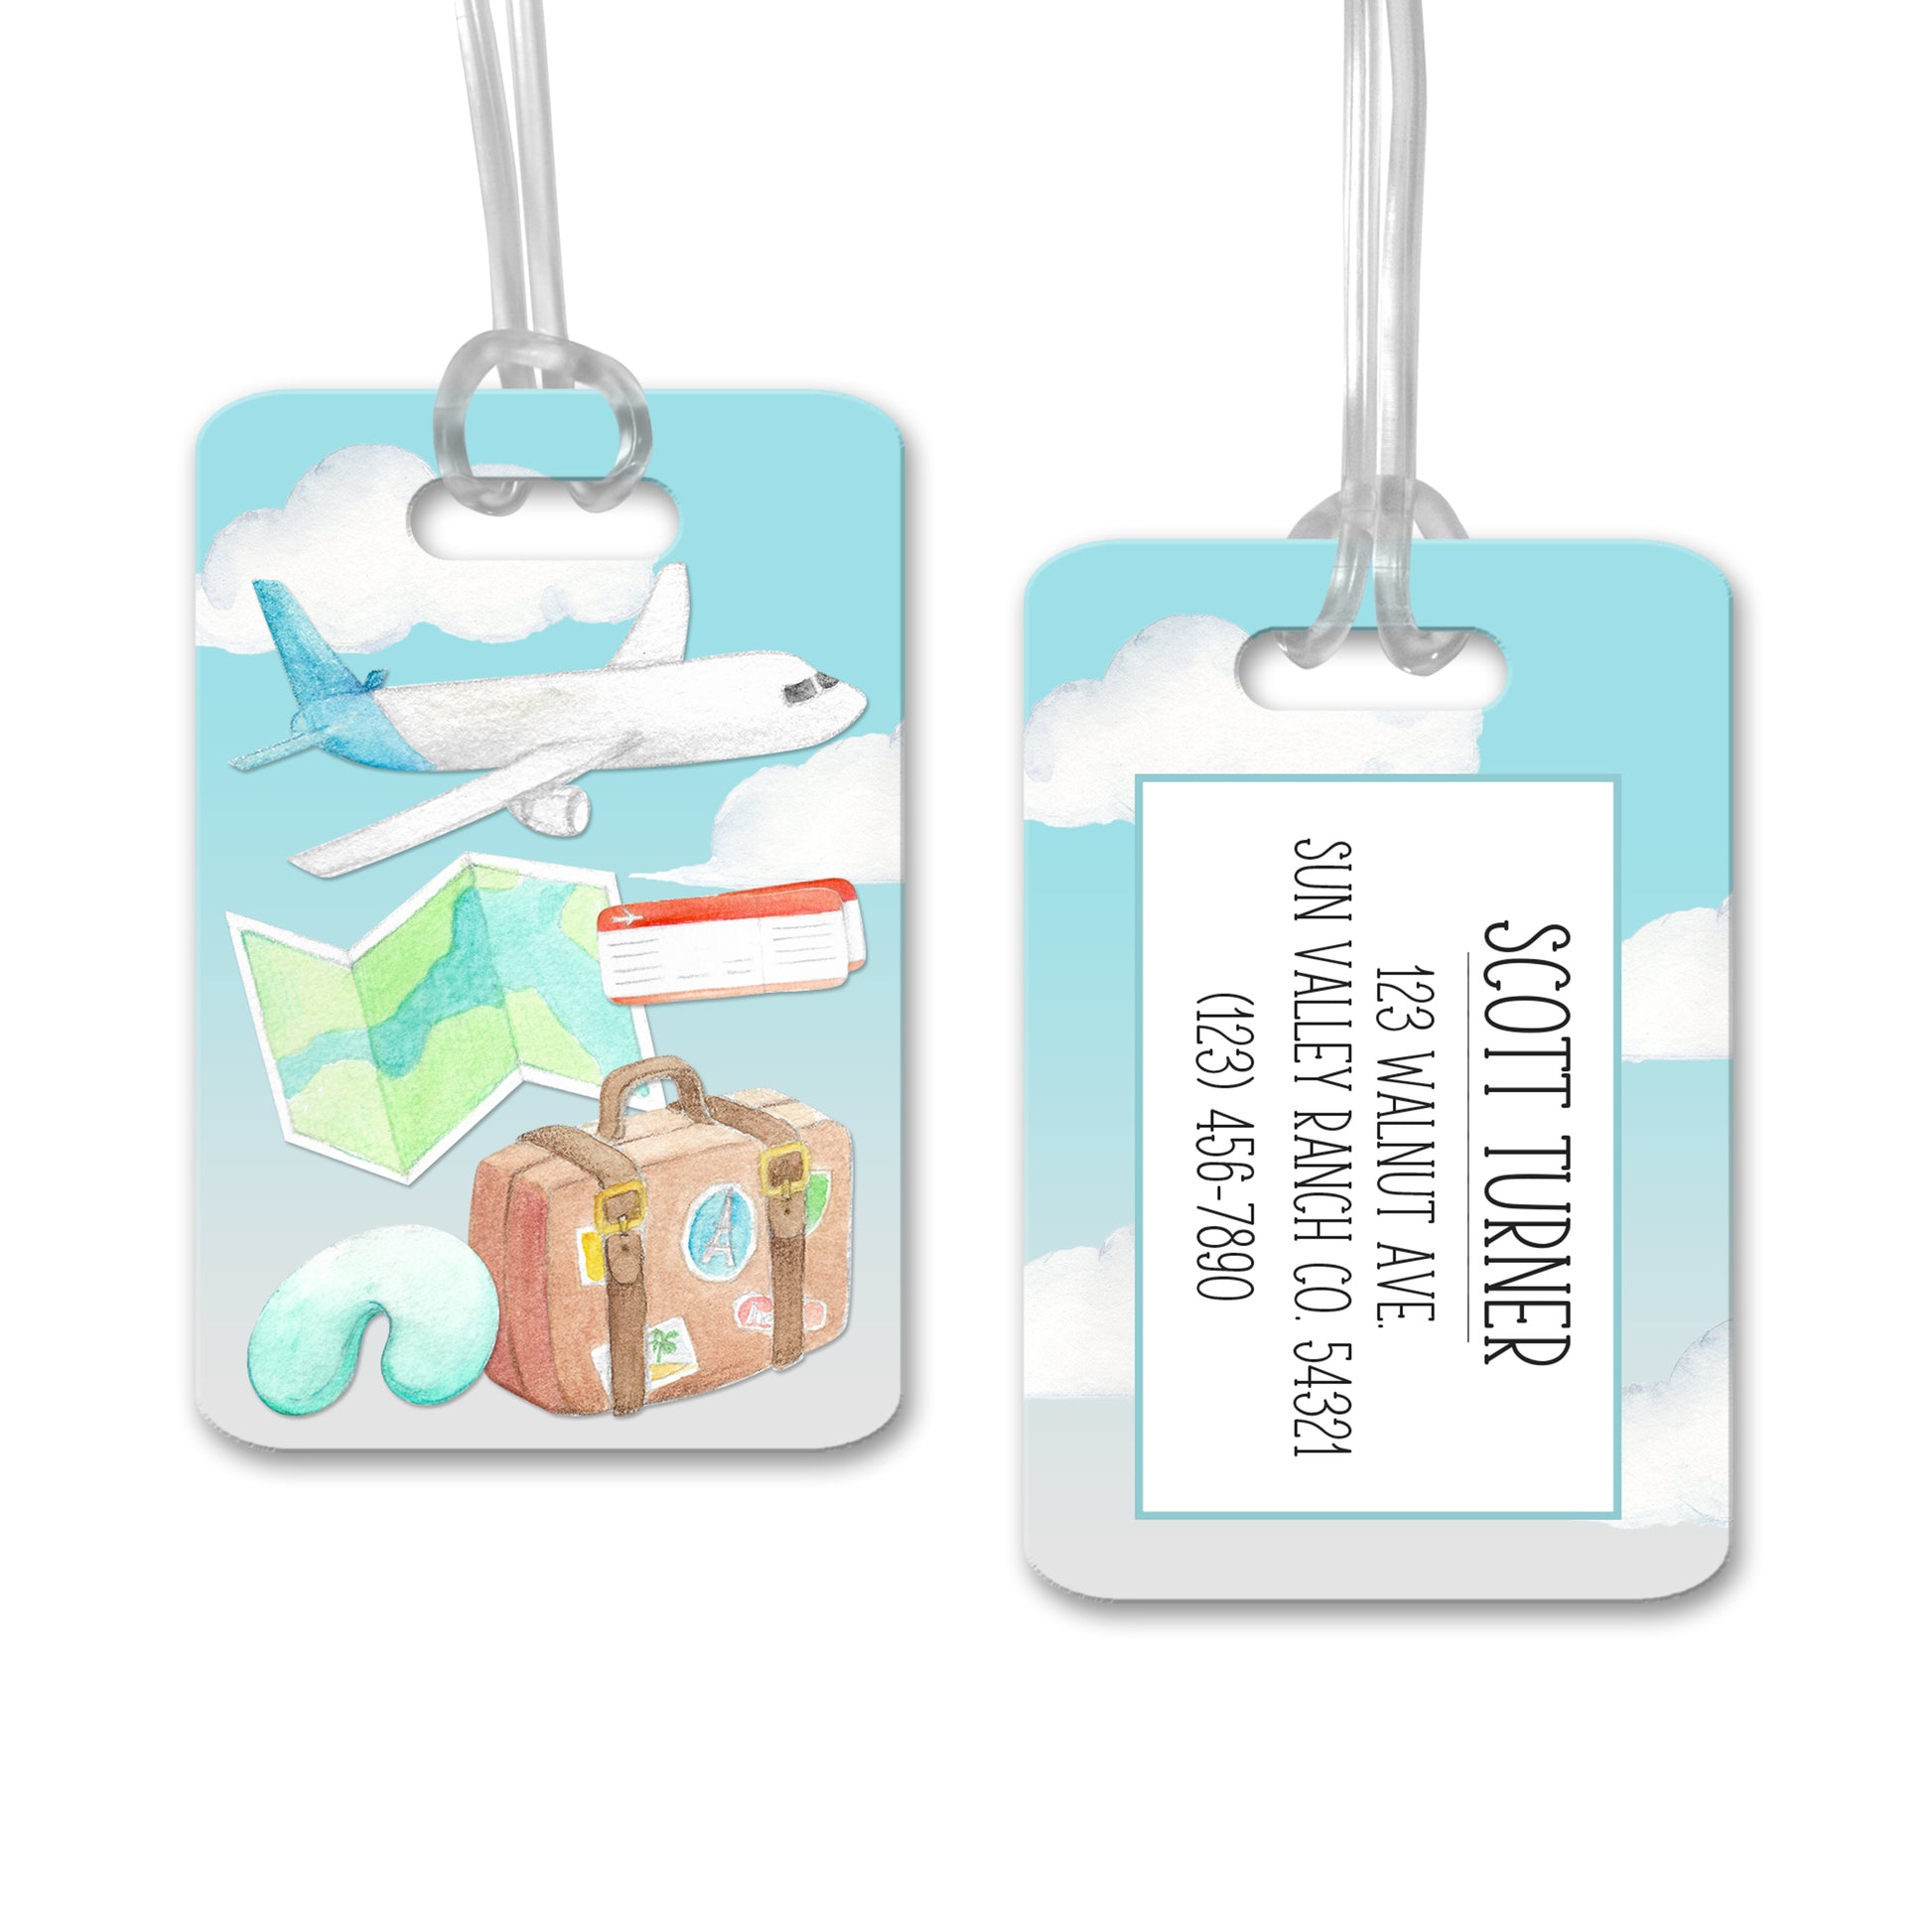 Personalized Travel Luggage Tag, Bag Tags, Suitcase ID